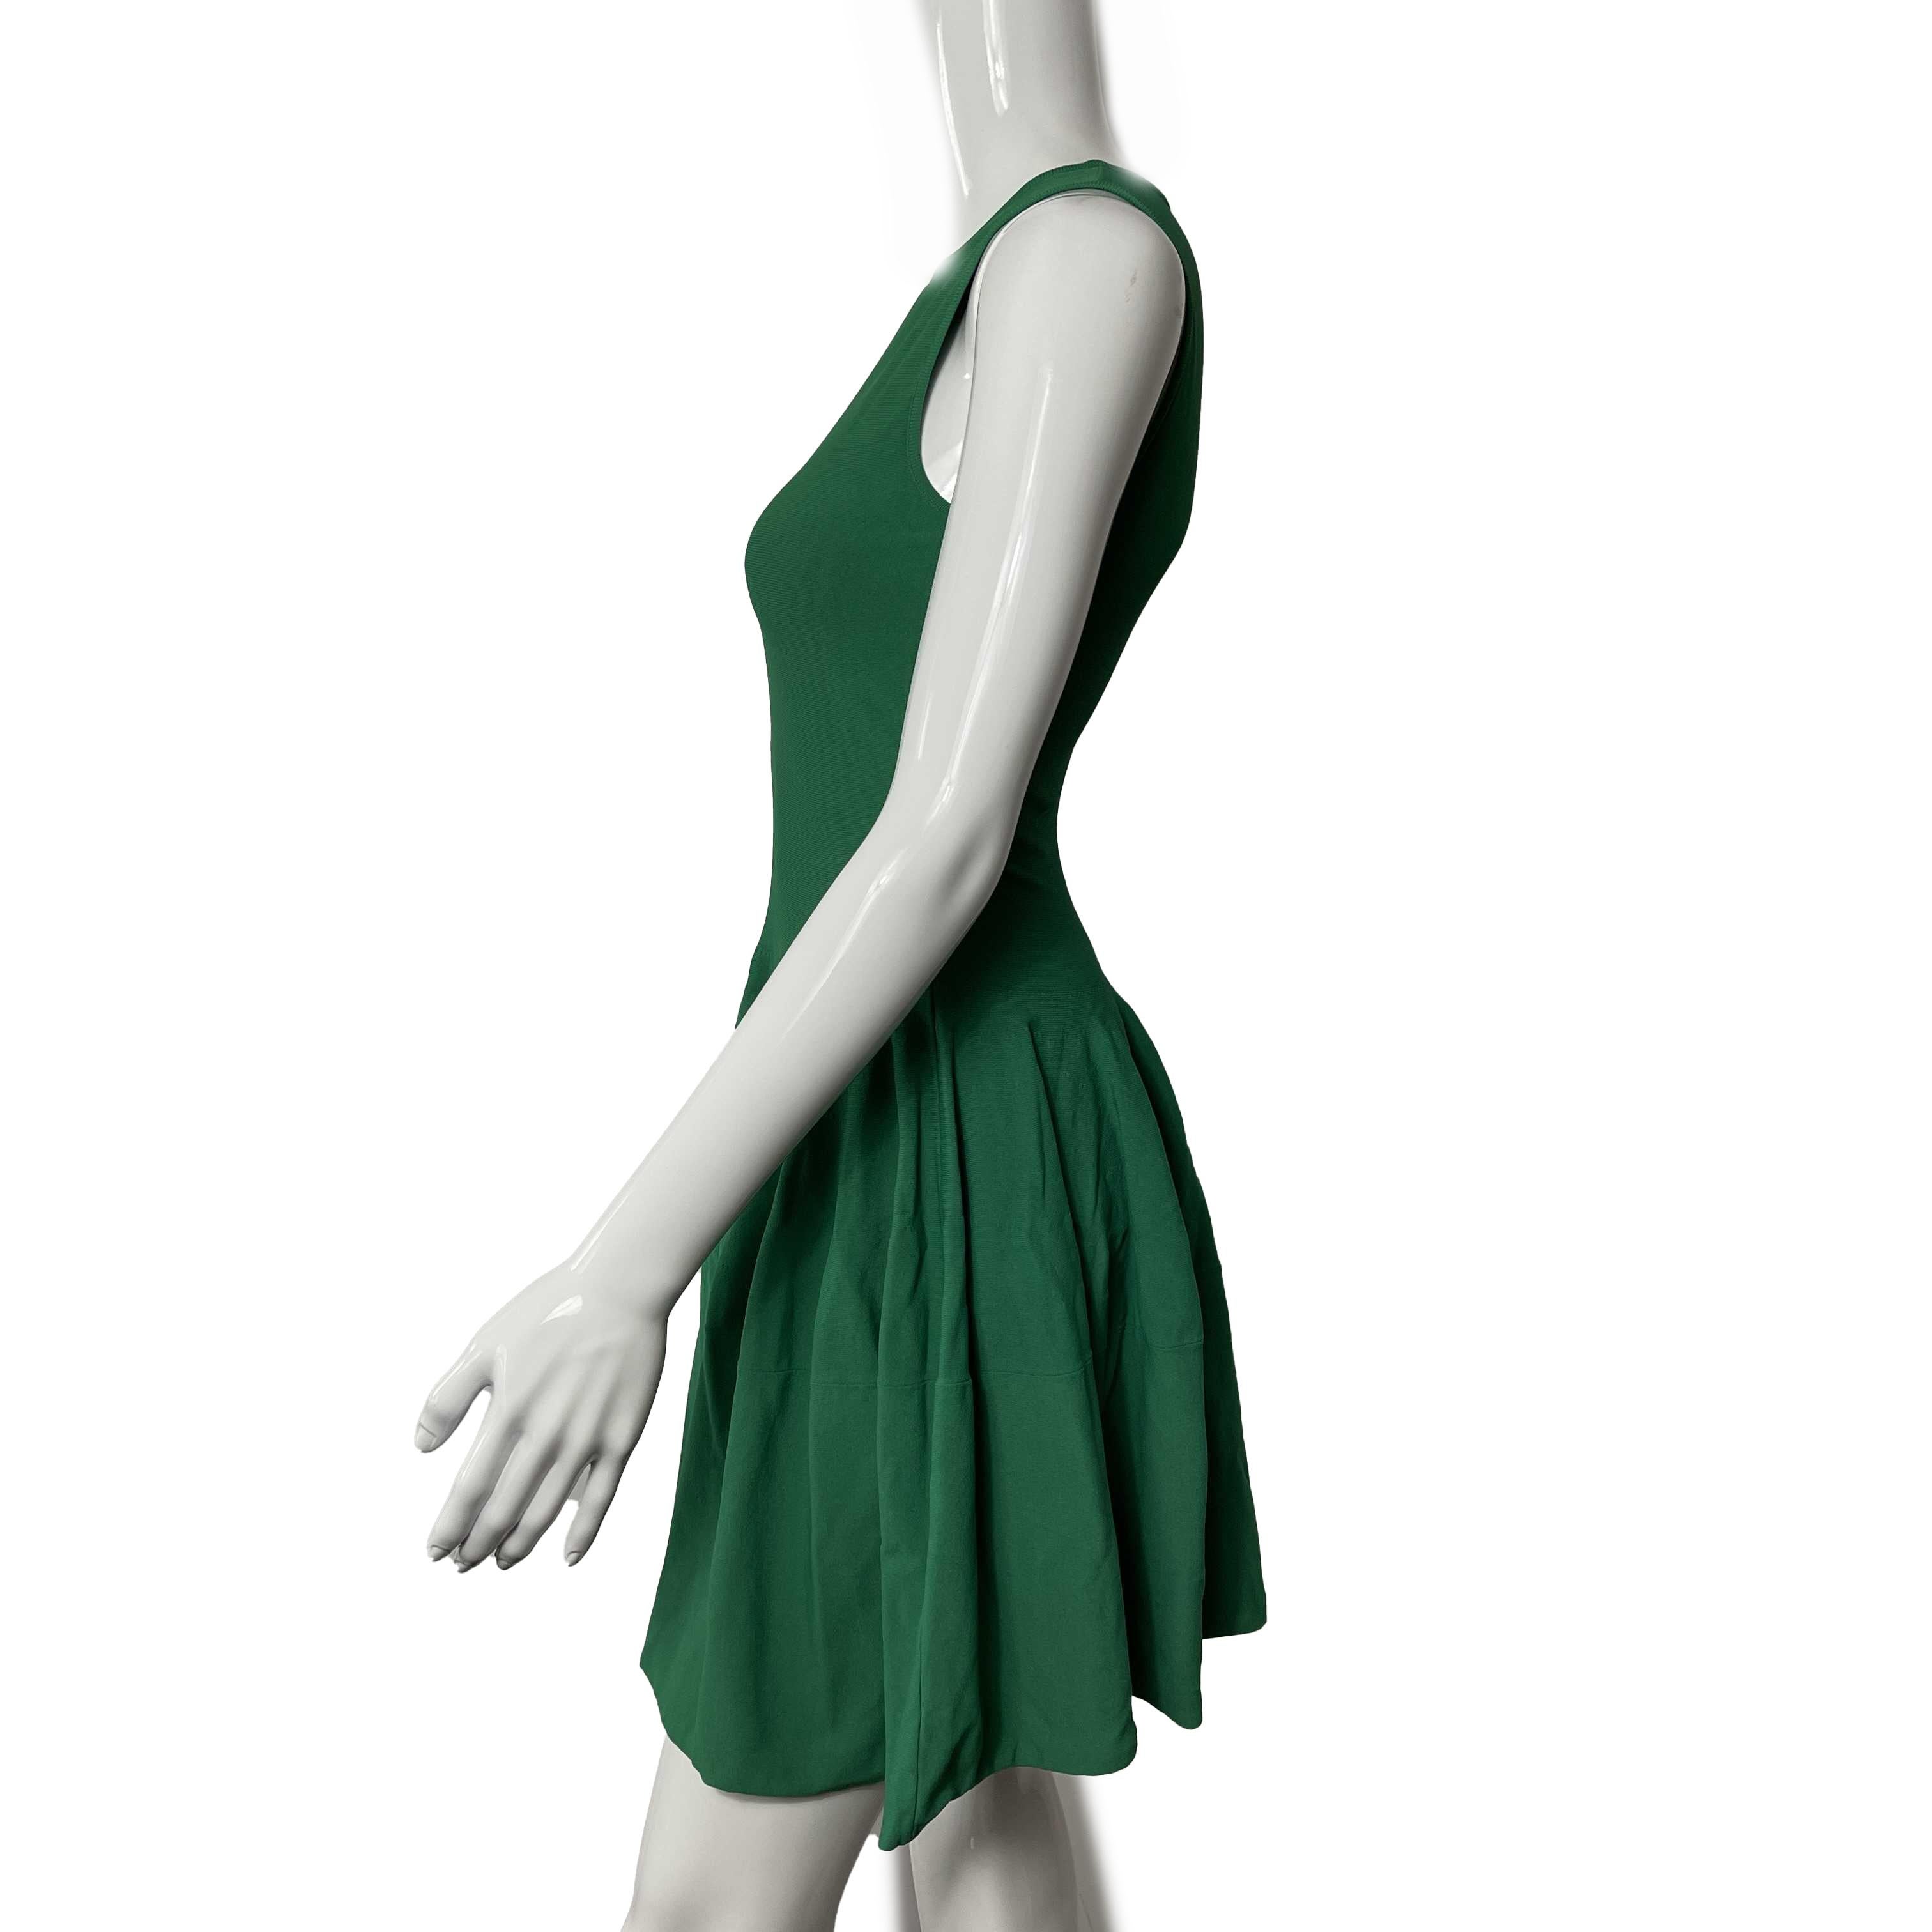 Alexander McQueen - Pristine - Solid Sleeveless Midi Flare - Green - XS - Dress

Description

This Alexander McQueen sleeveless dress is midi length with a flare style that falls as if there are pleats.
It is solid green in color, crafted with